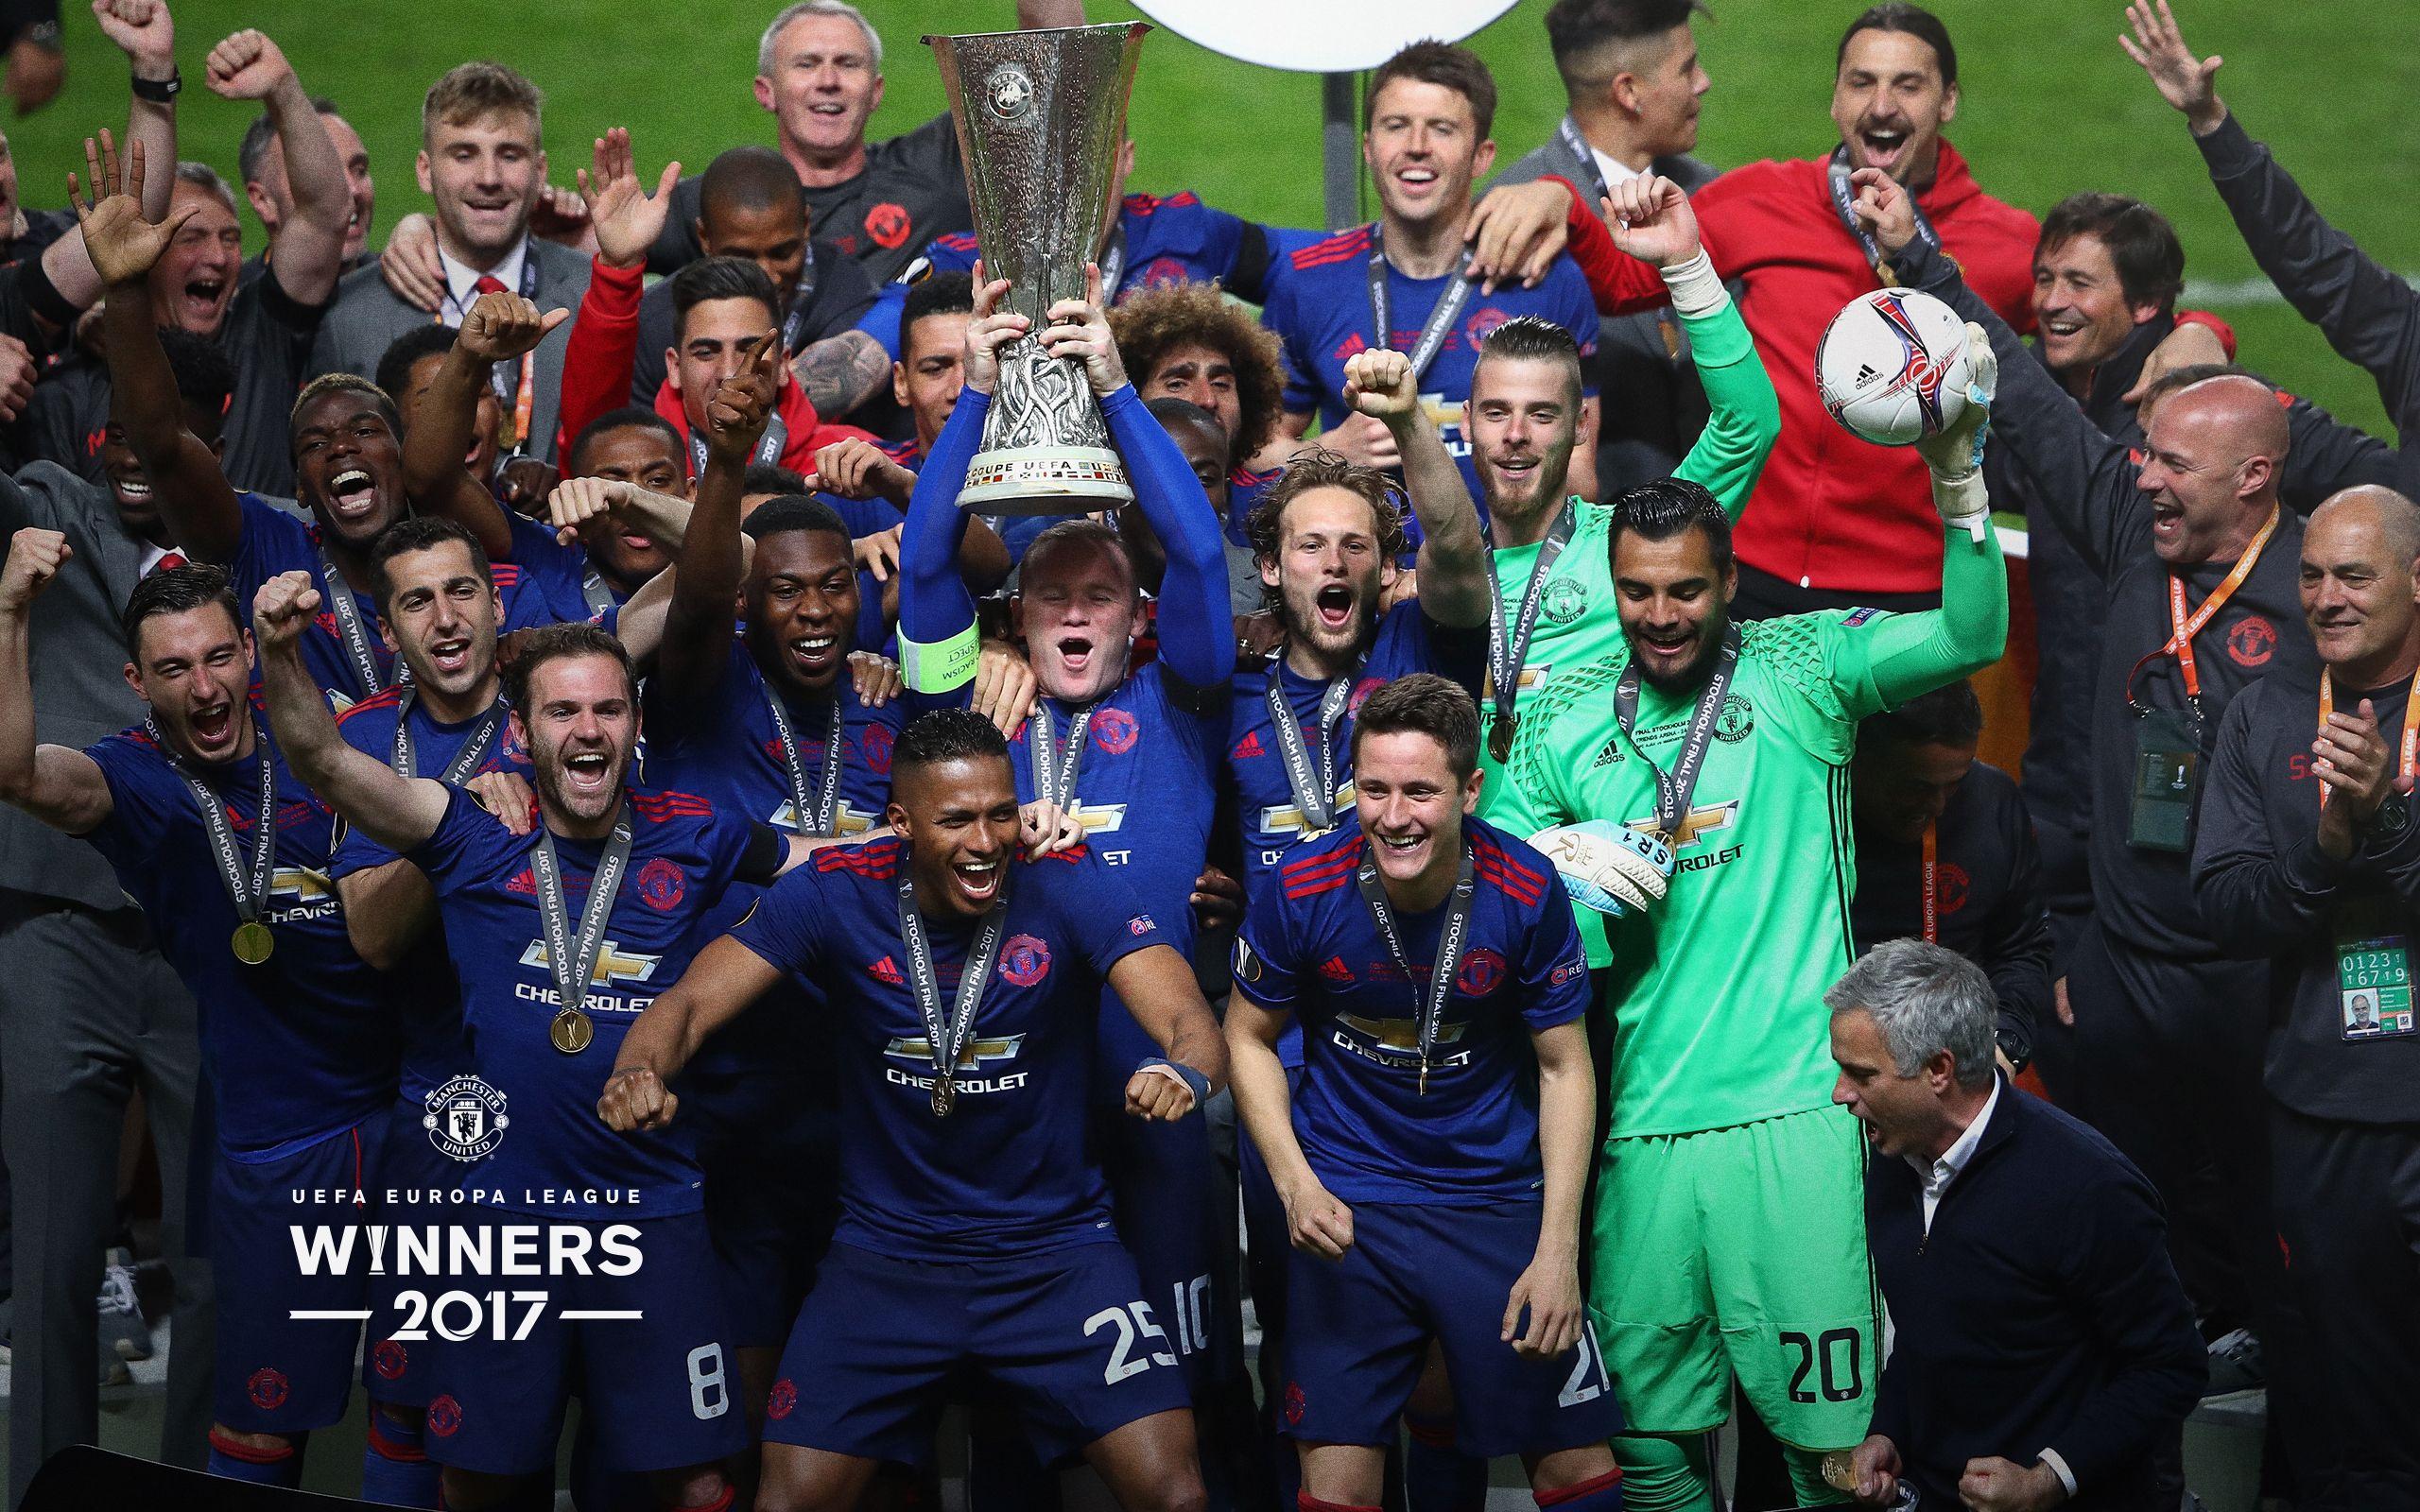 Manchester United win the UEFA Europa League Manchester